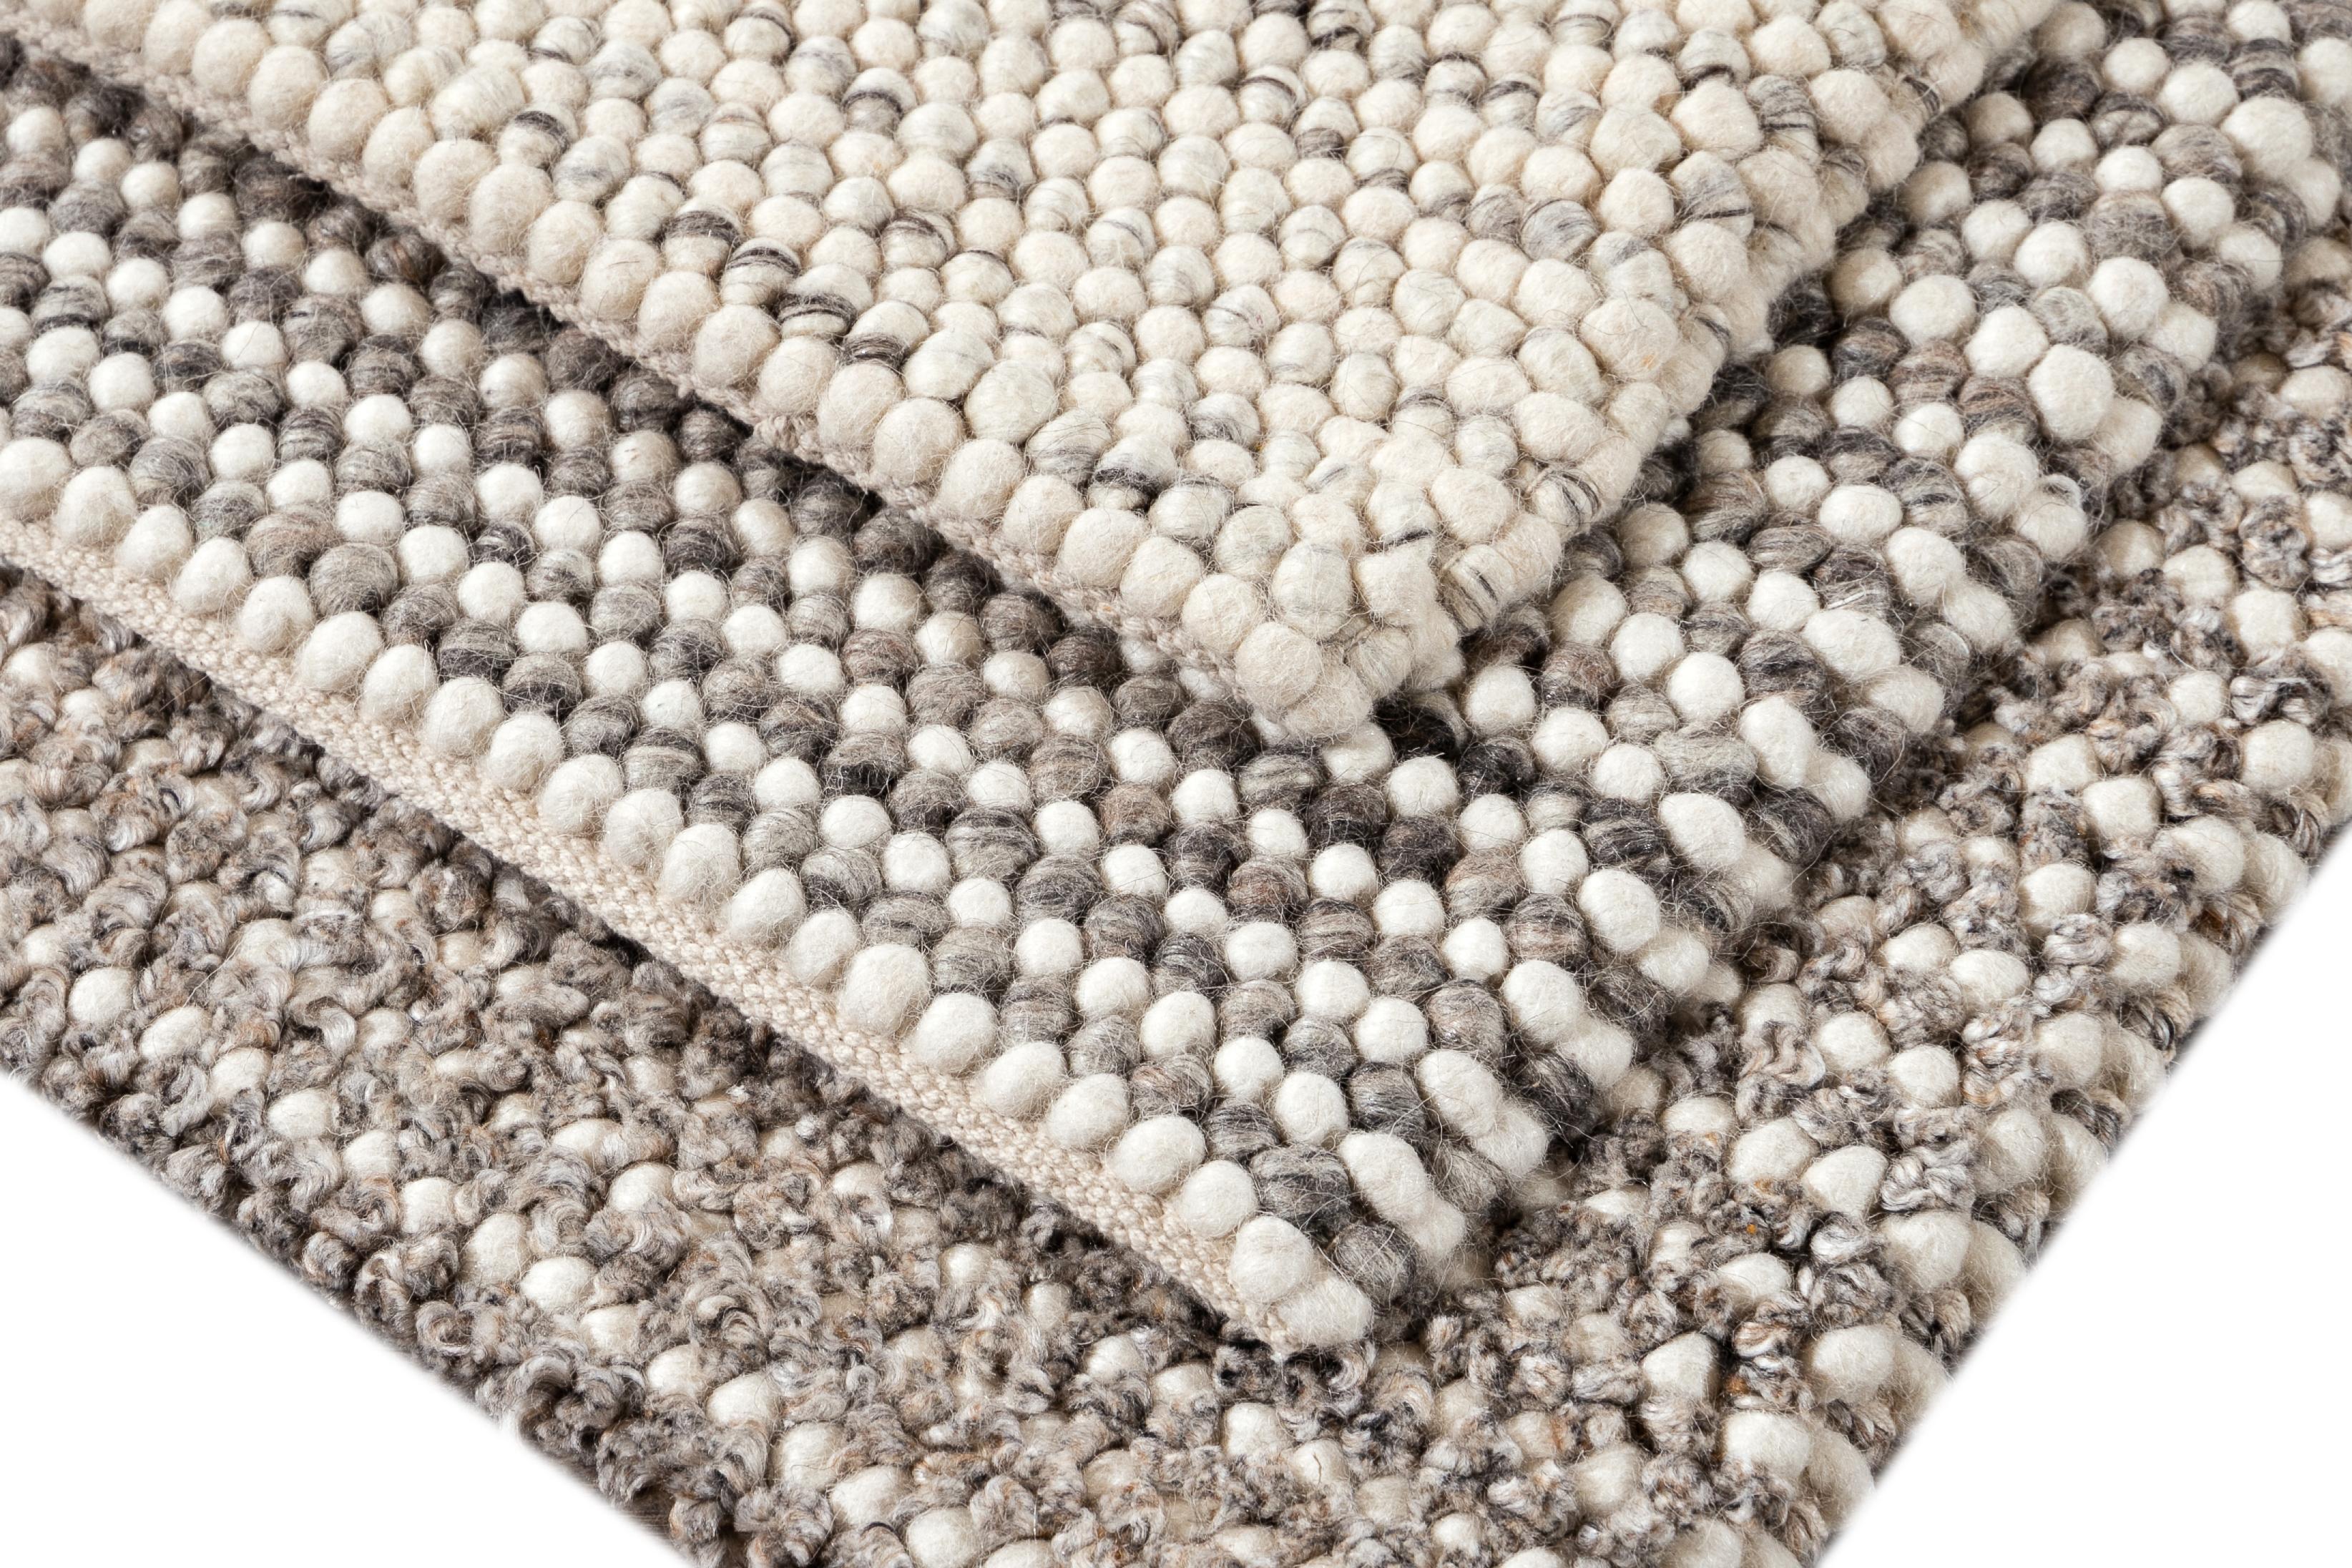 Solid-colored woven wool textured custom rug in varying neutral shades. Custom sizes and colors made-to-order. 

Collection: Easton
Material: 100% wool
Lead time: Approximate 15-20 weeks available
Colors: Greige, grey, Lt. silver made in